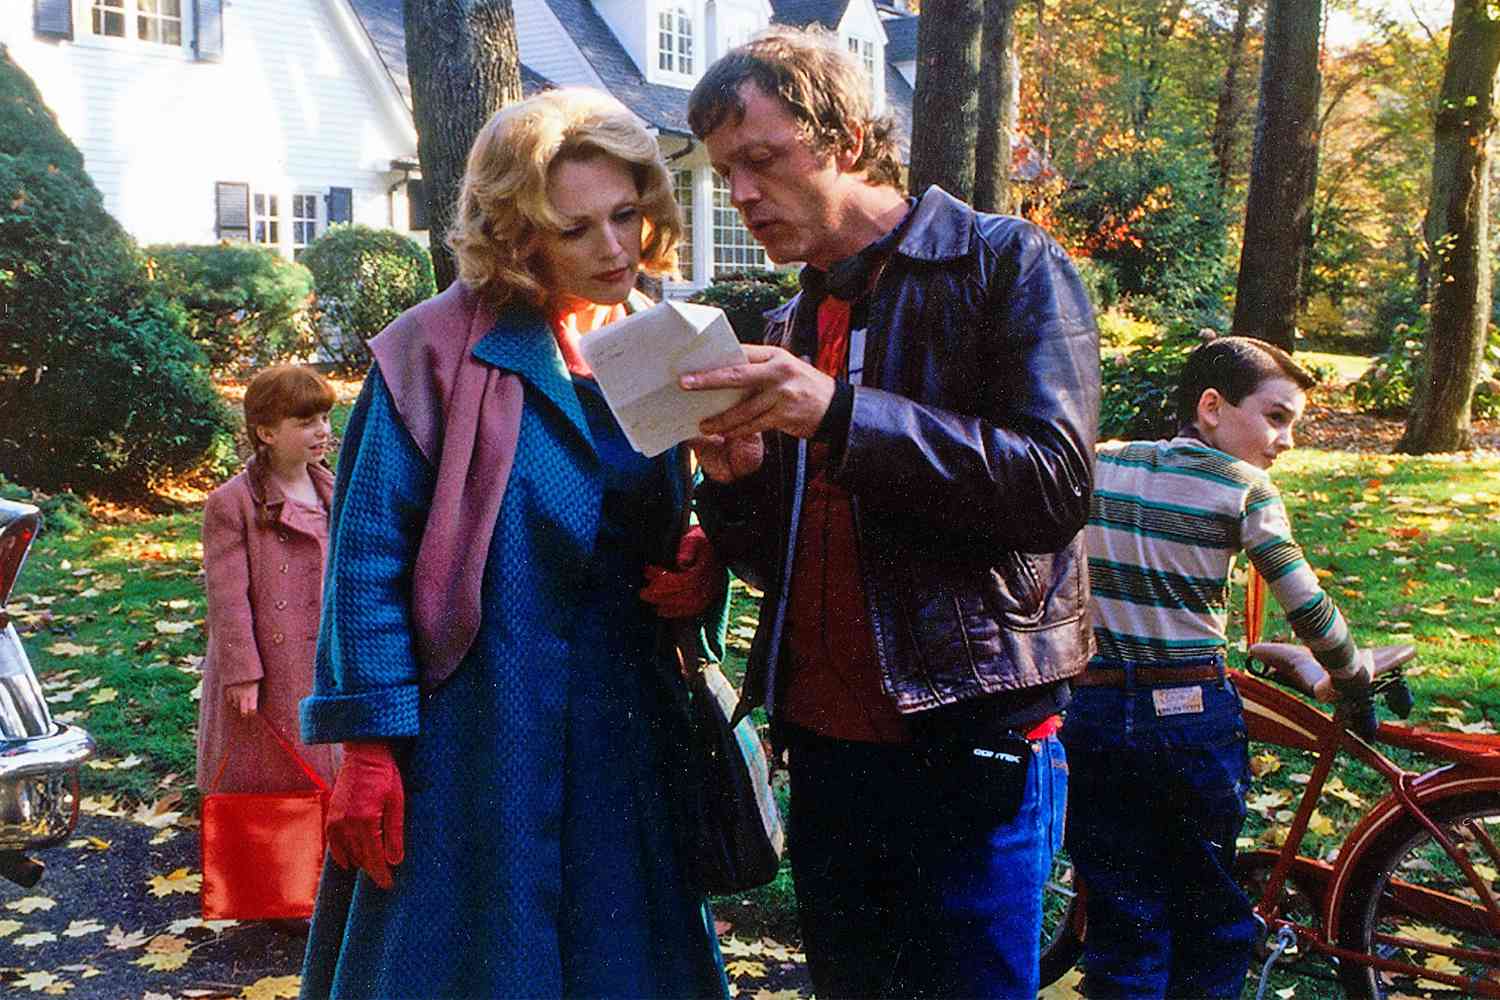 Todd Haynes on 30 years of New Queer Cinema: 'We were trying to make sense of a scary time'